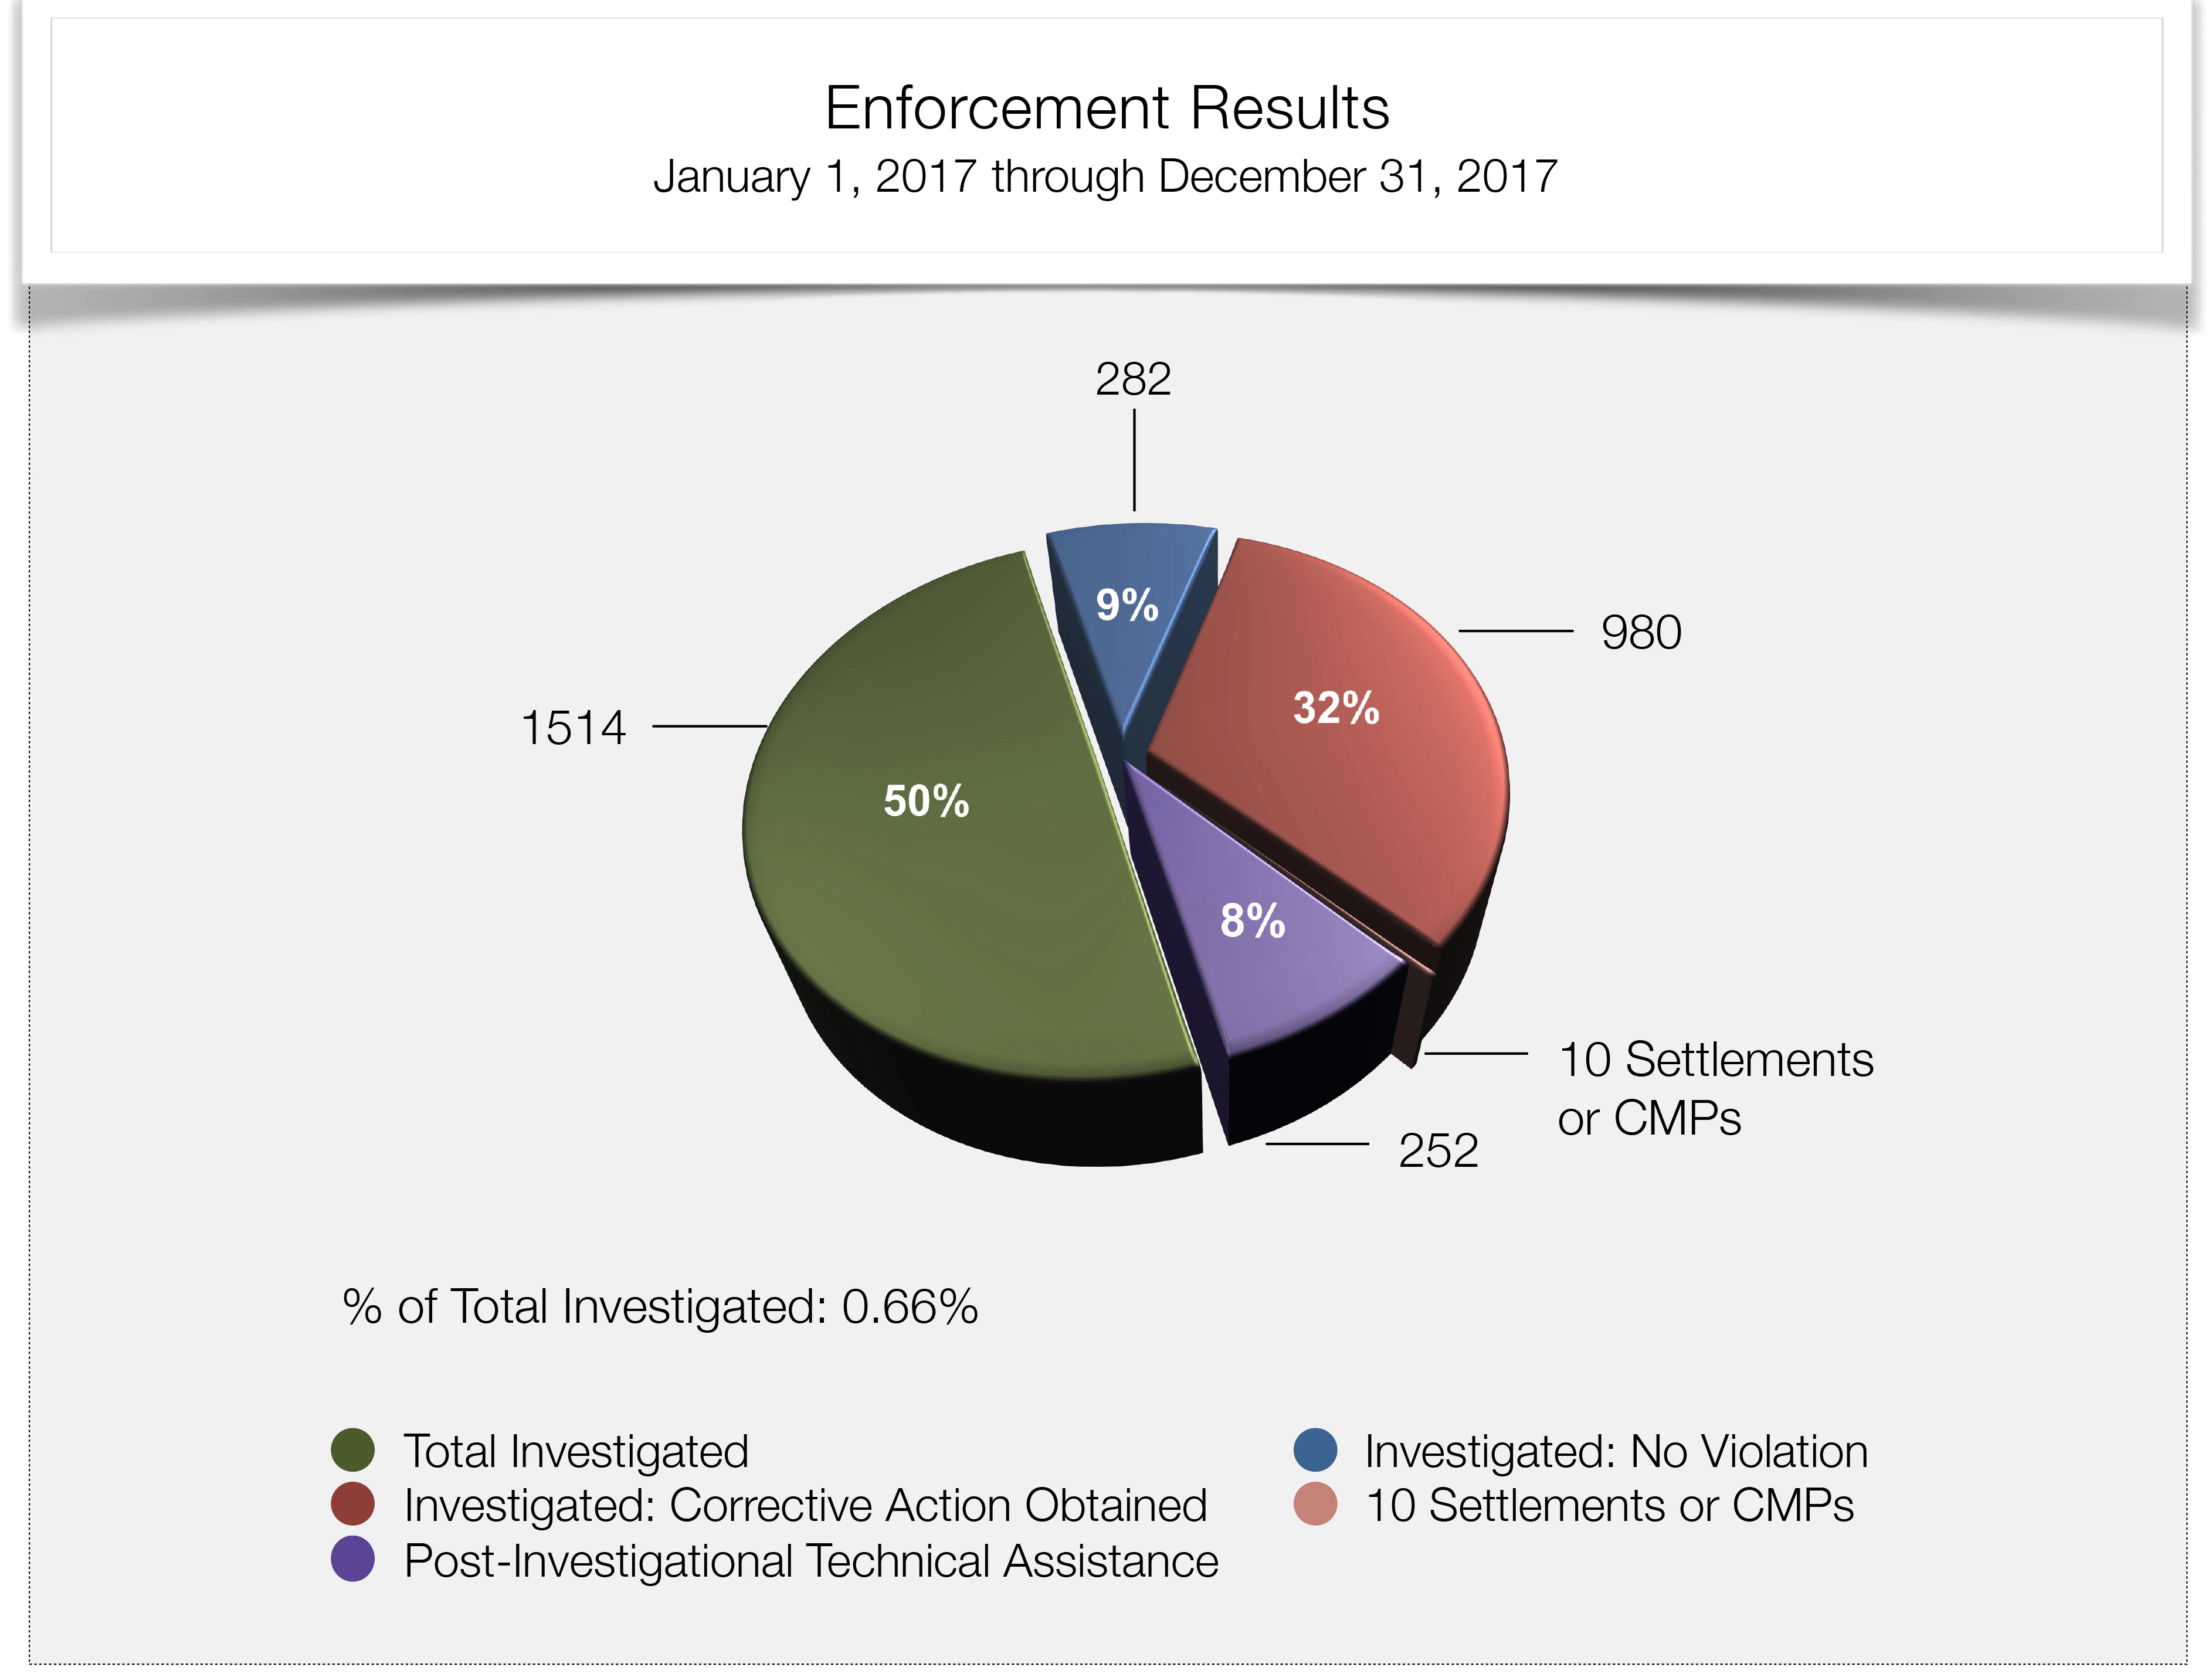 Enforcement Results - January 1, 2017 through December 31, 2017